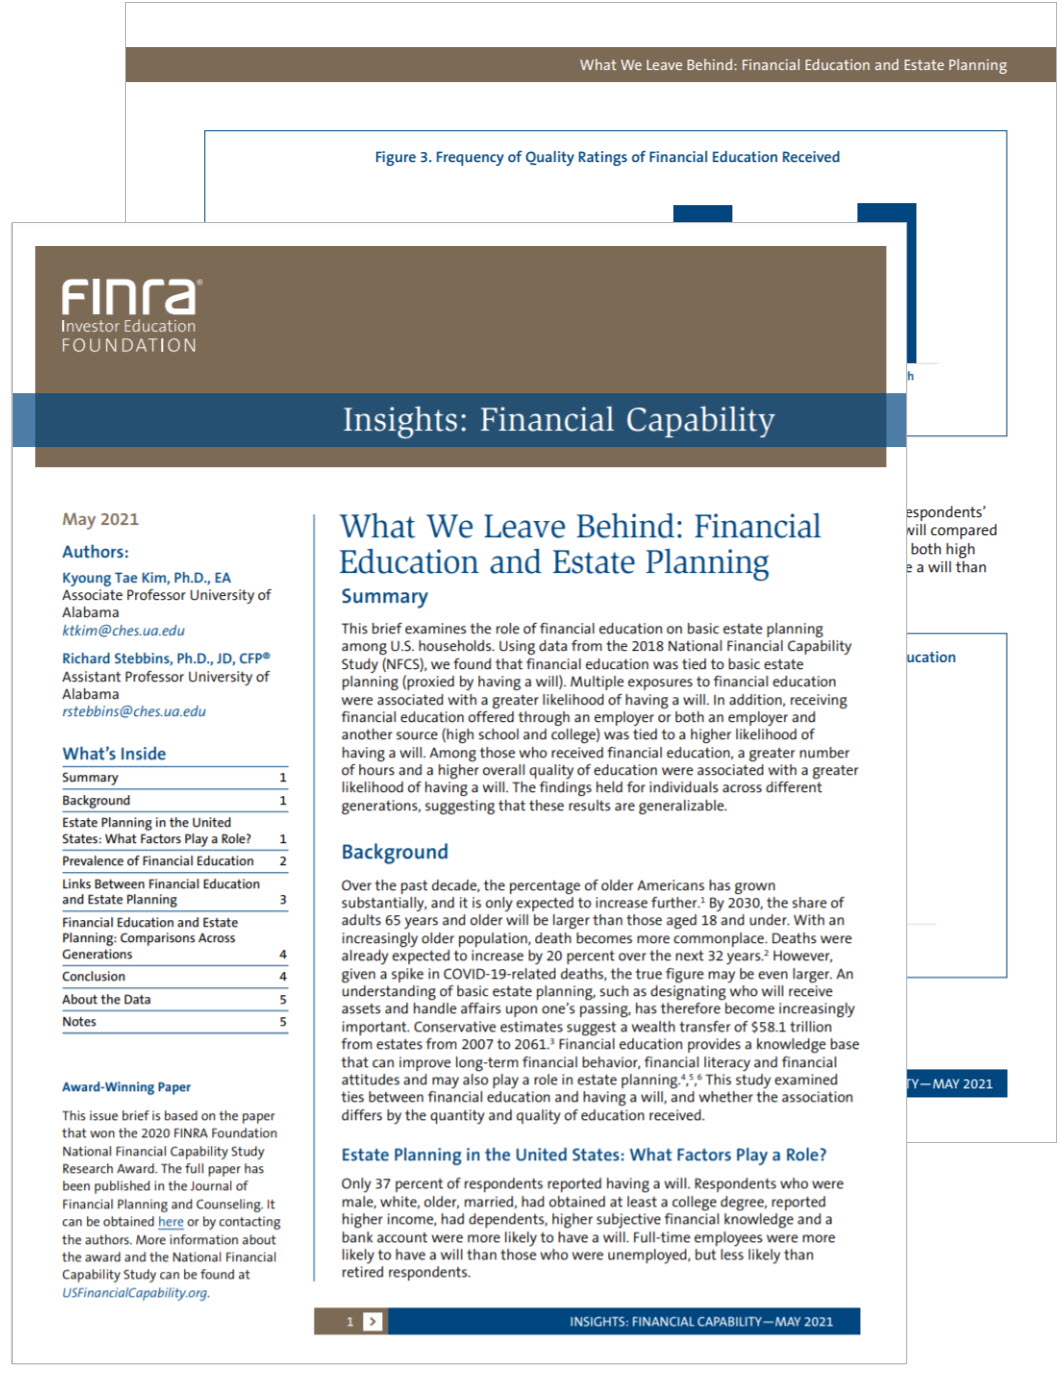 What We Leave Behind: Financial Education and Estate Planning